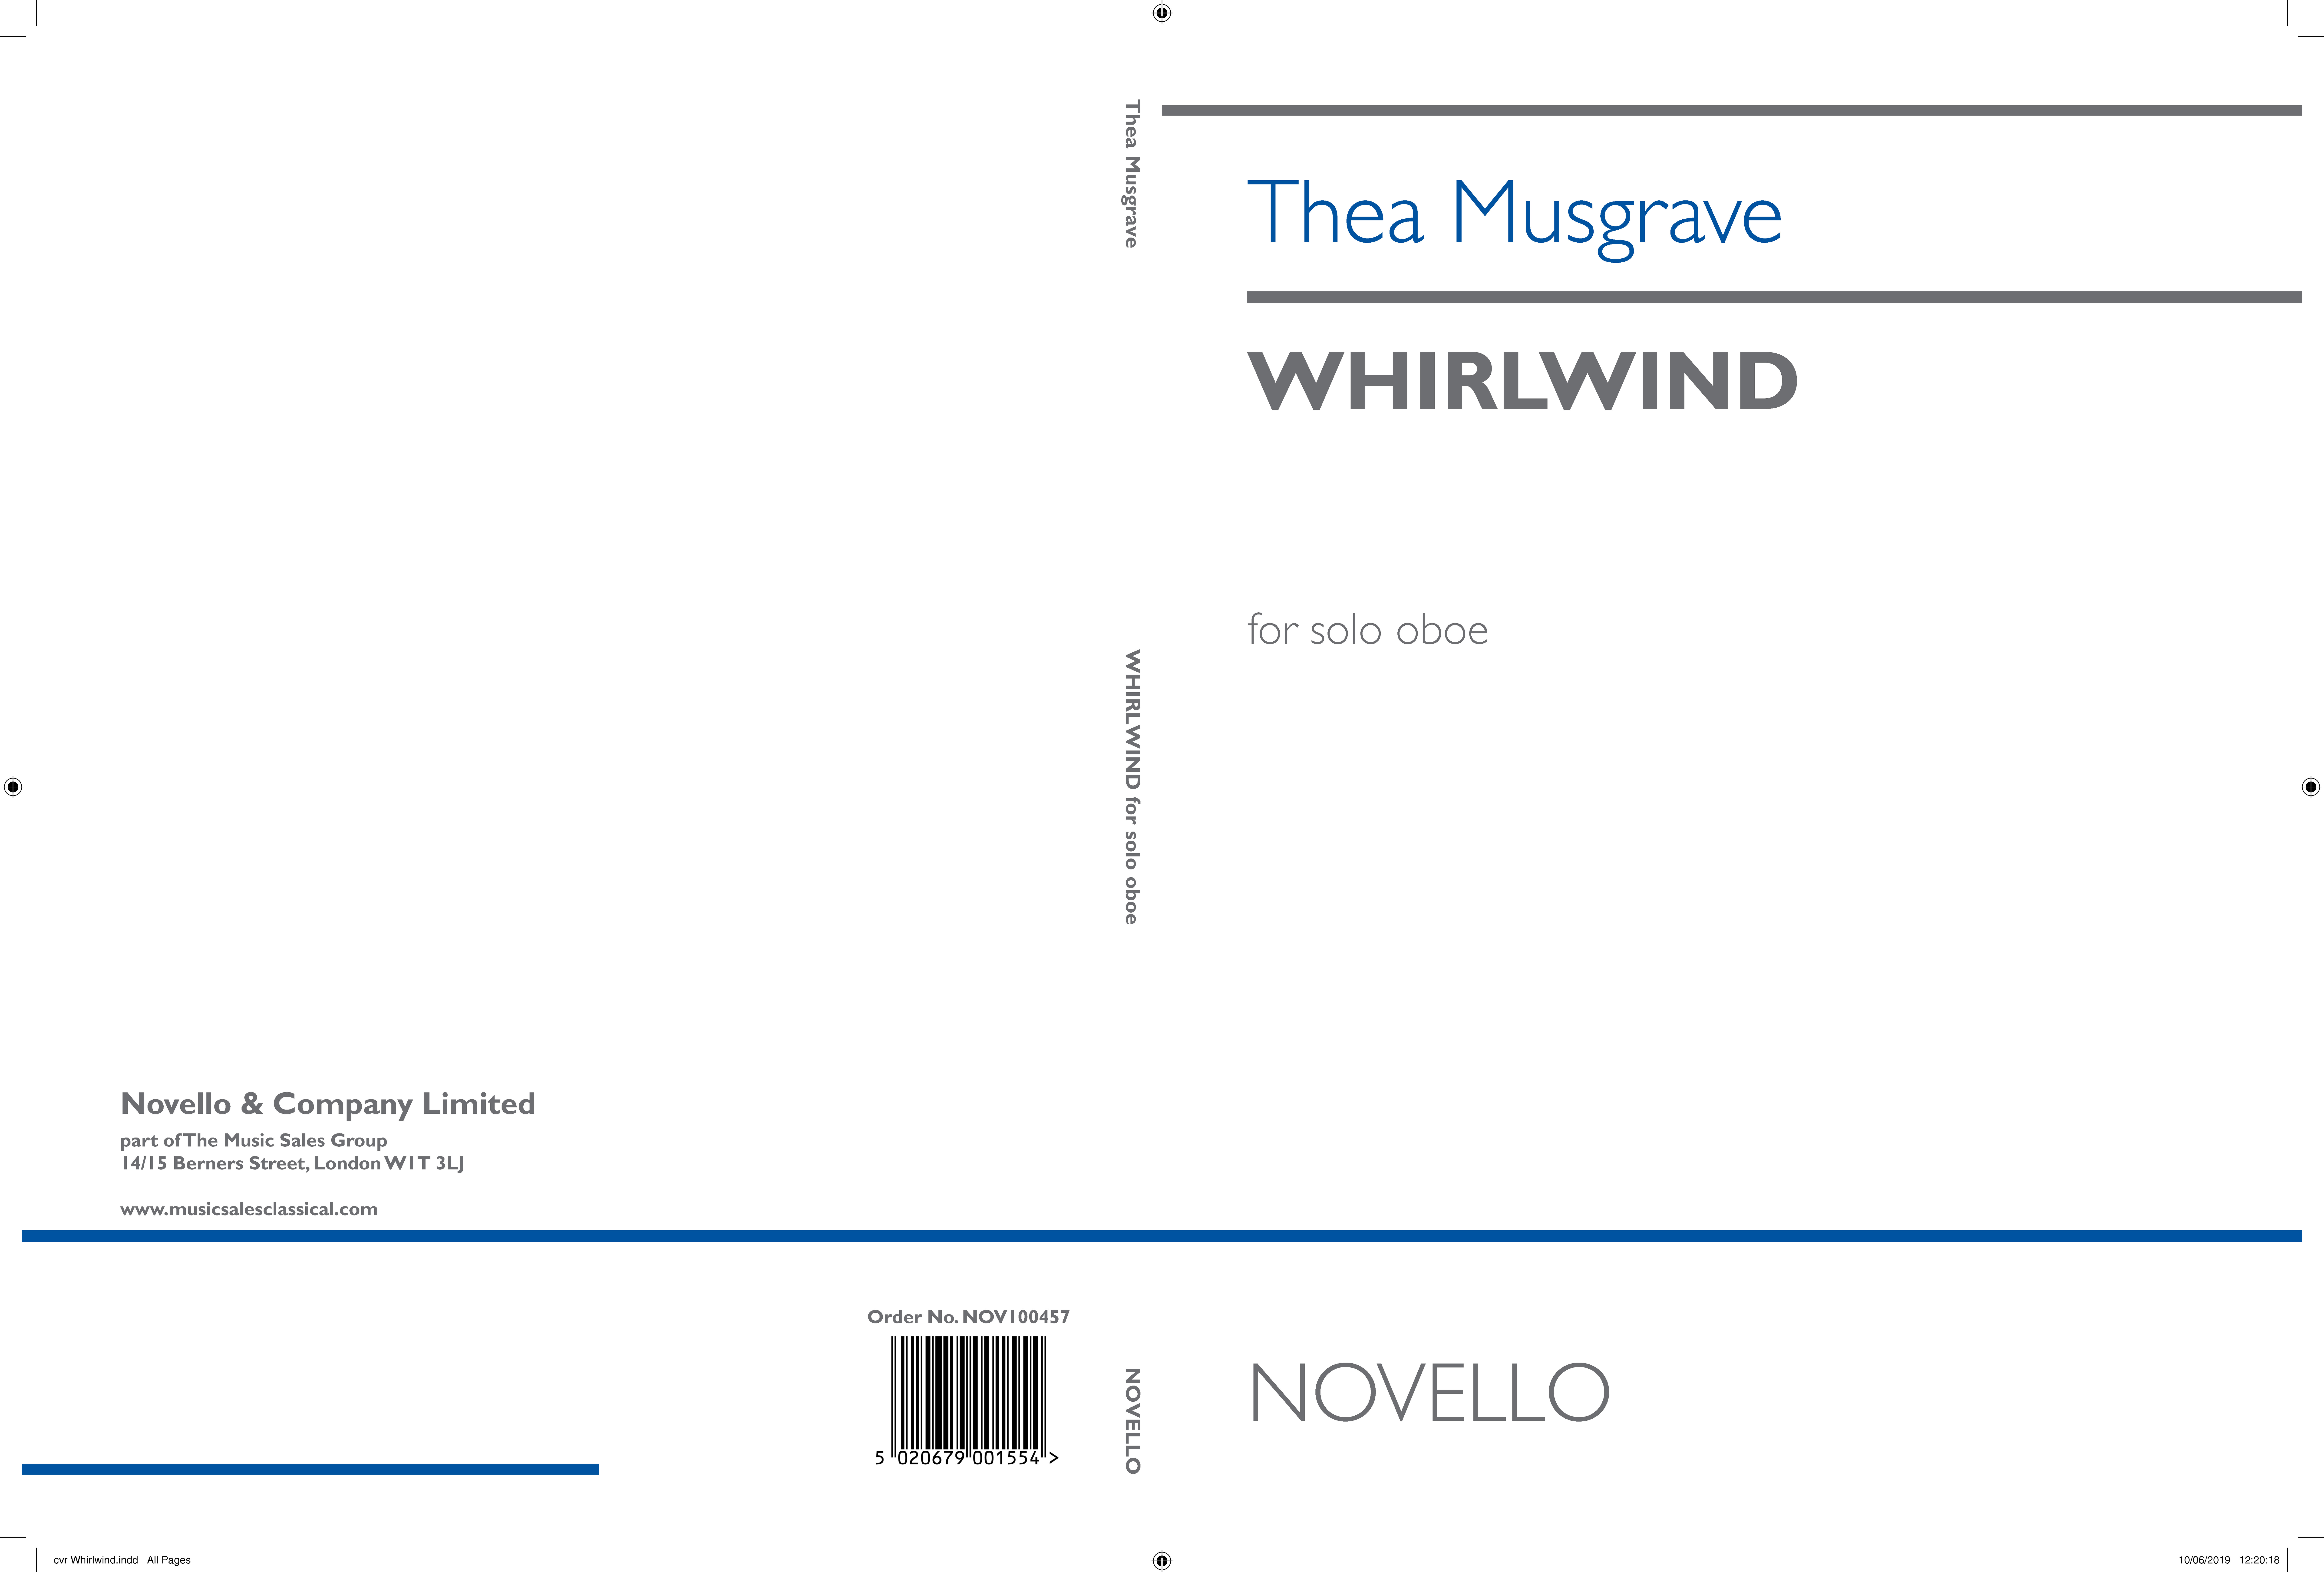 Thea Musgrave: Whirlwind